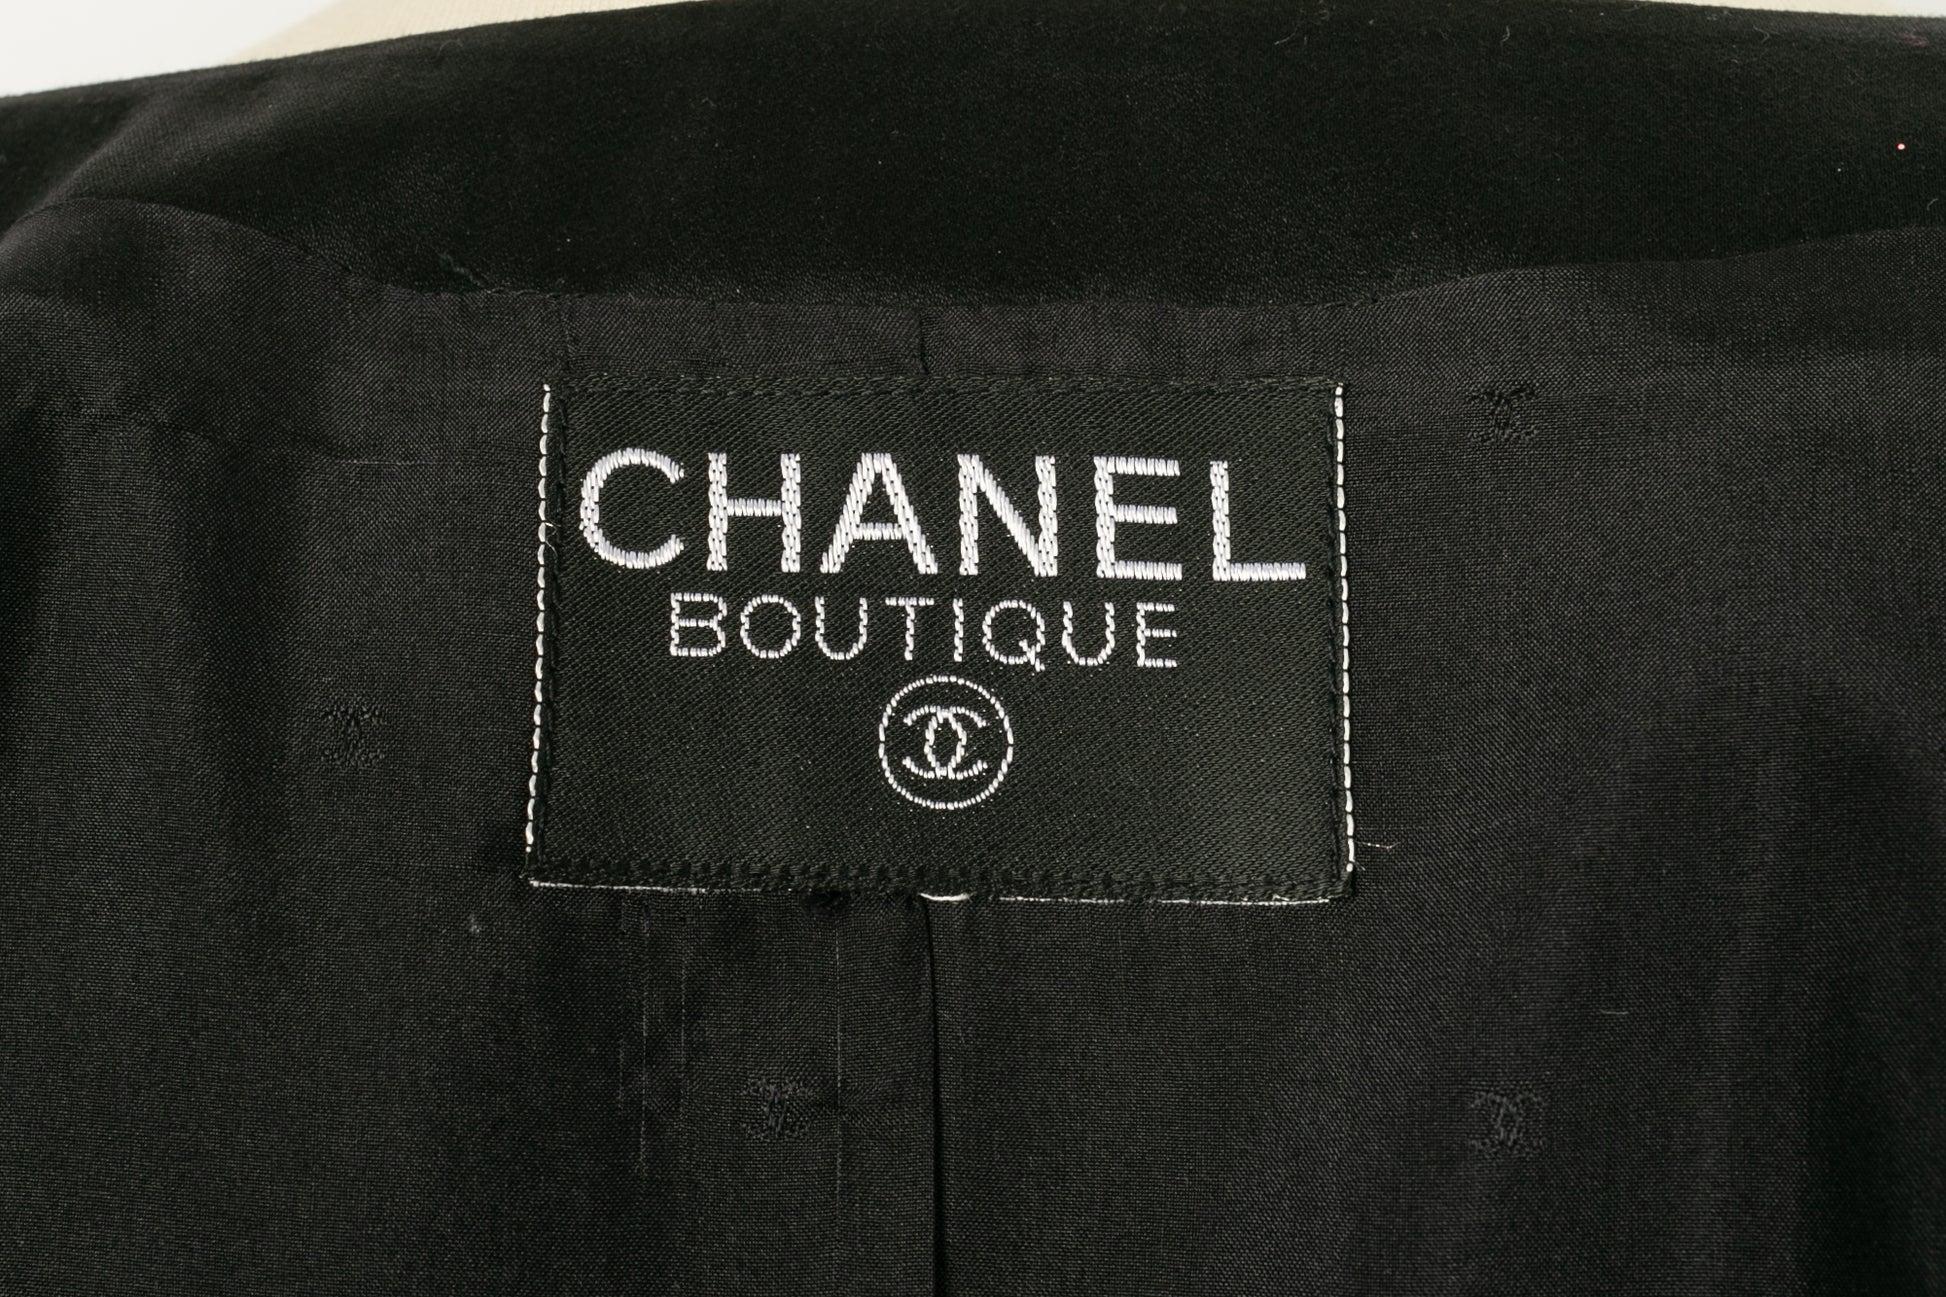 Chanel Short-Sleeved Jacket in Black Satin Edged with White Satin, 1990s For Sale 4